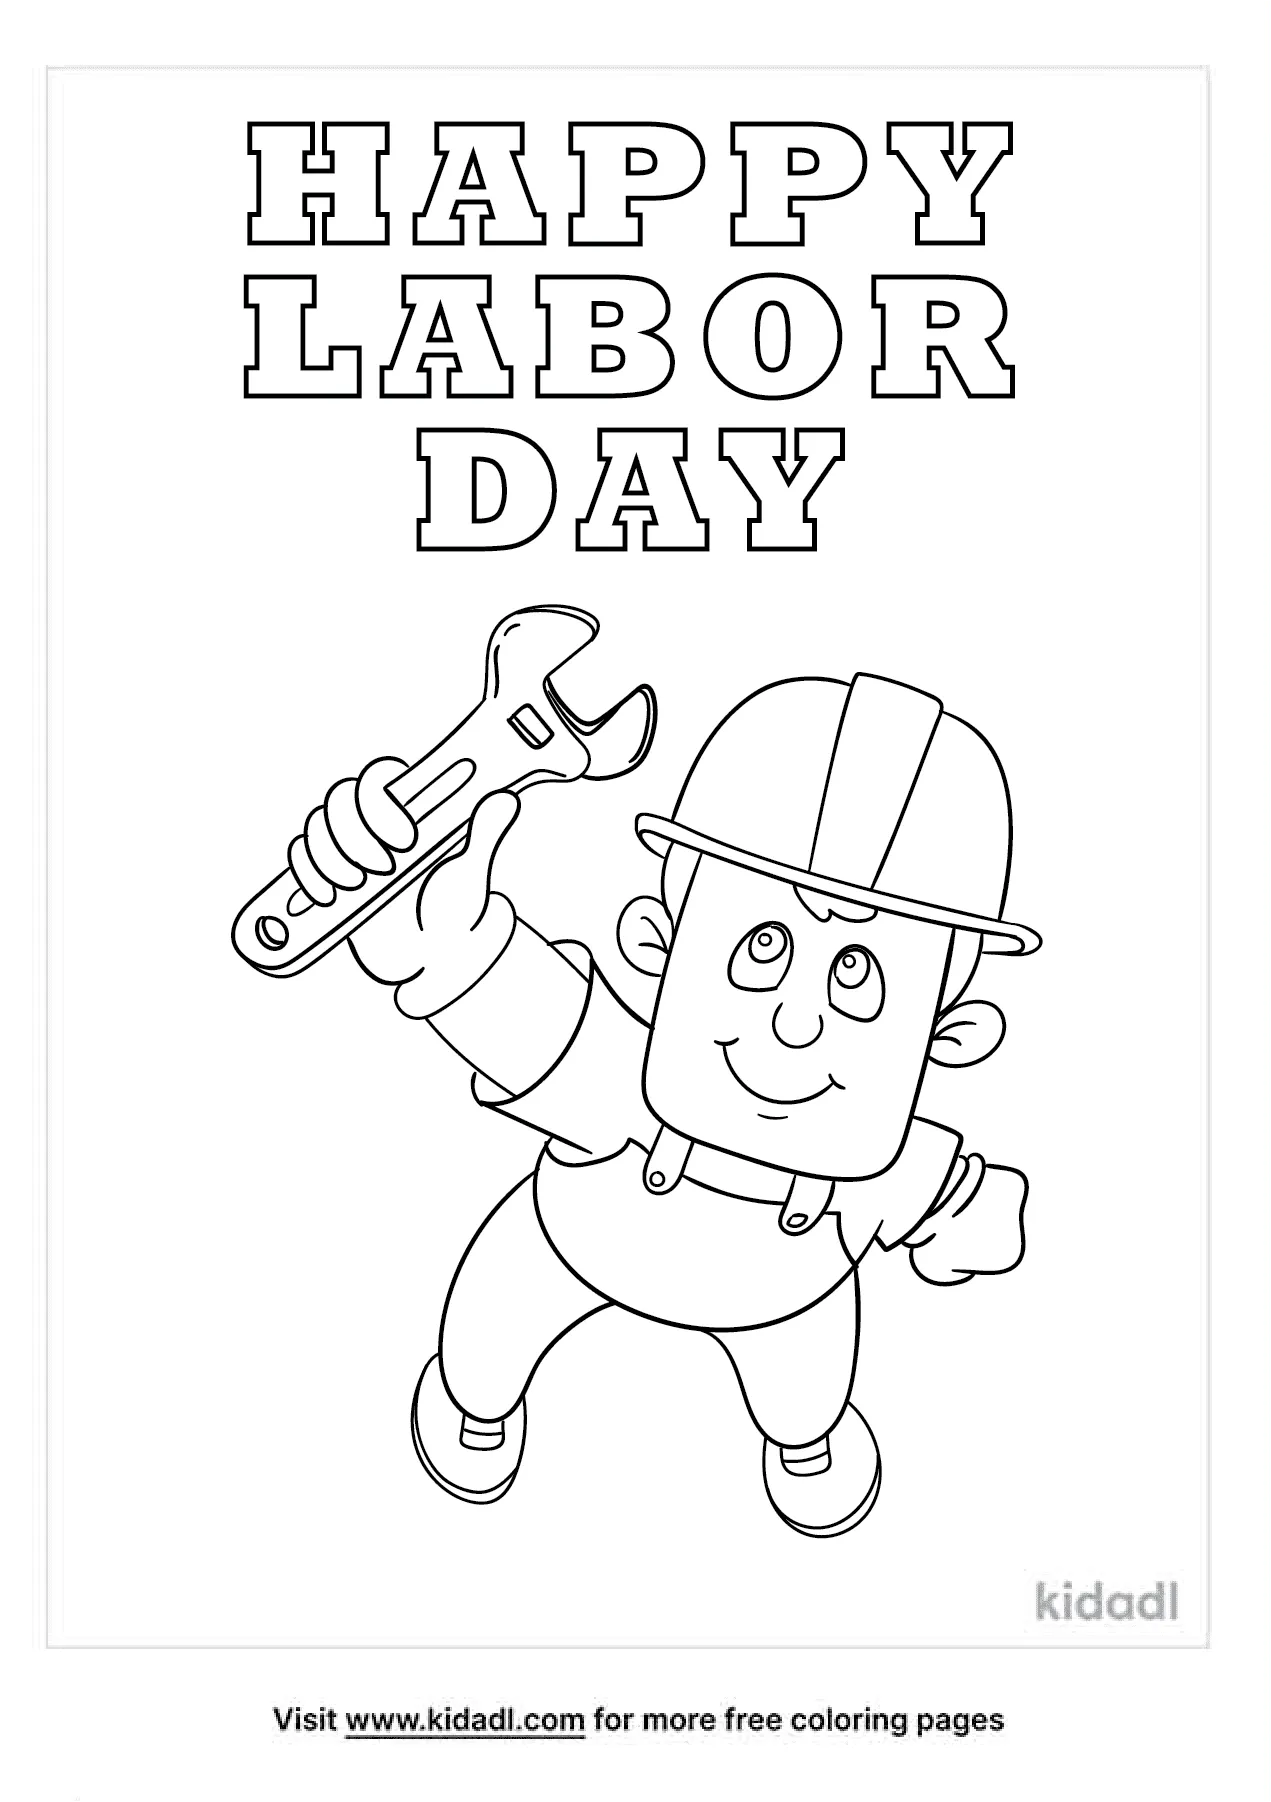 Labor Day Coloring Pages Free Seasonal Celebrations Coloring Pages Kidadl